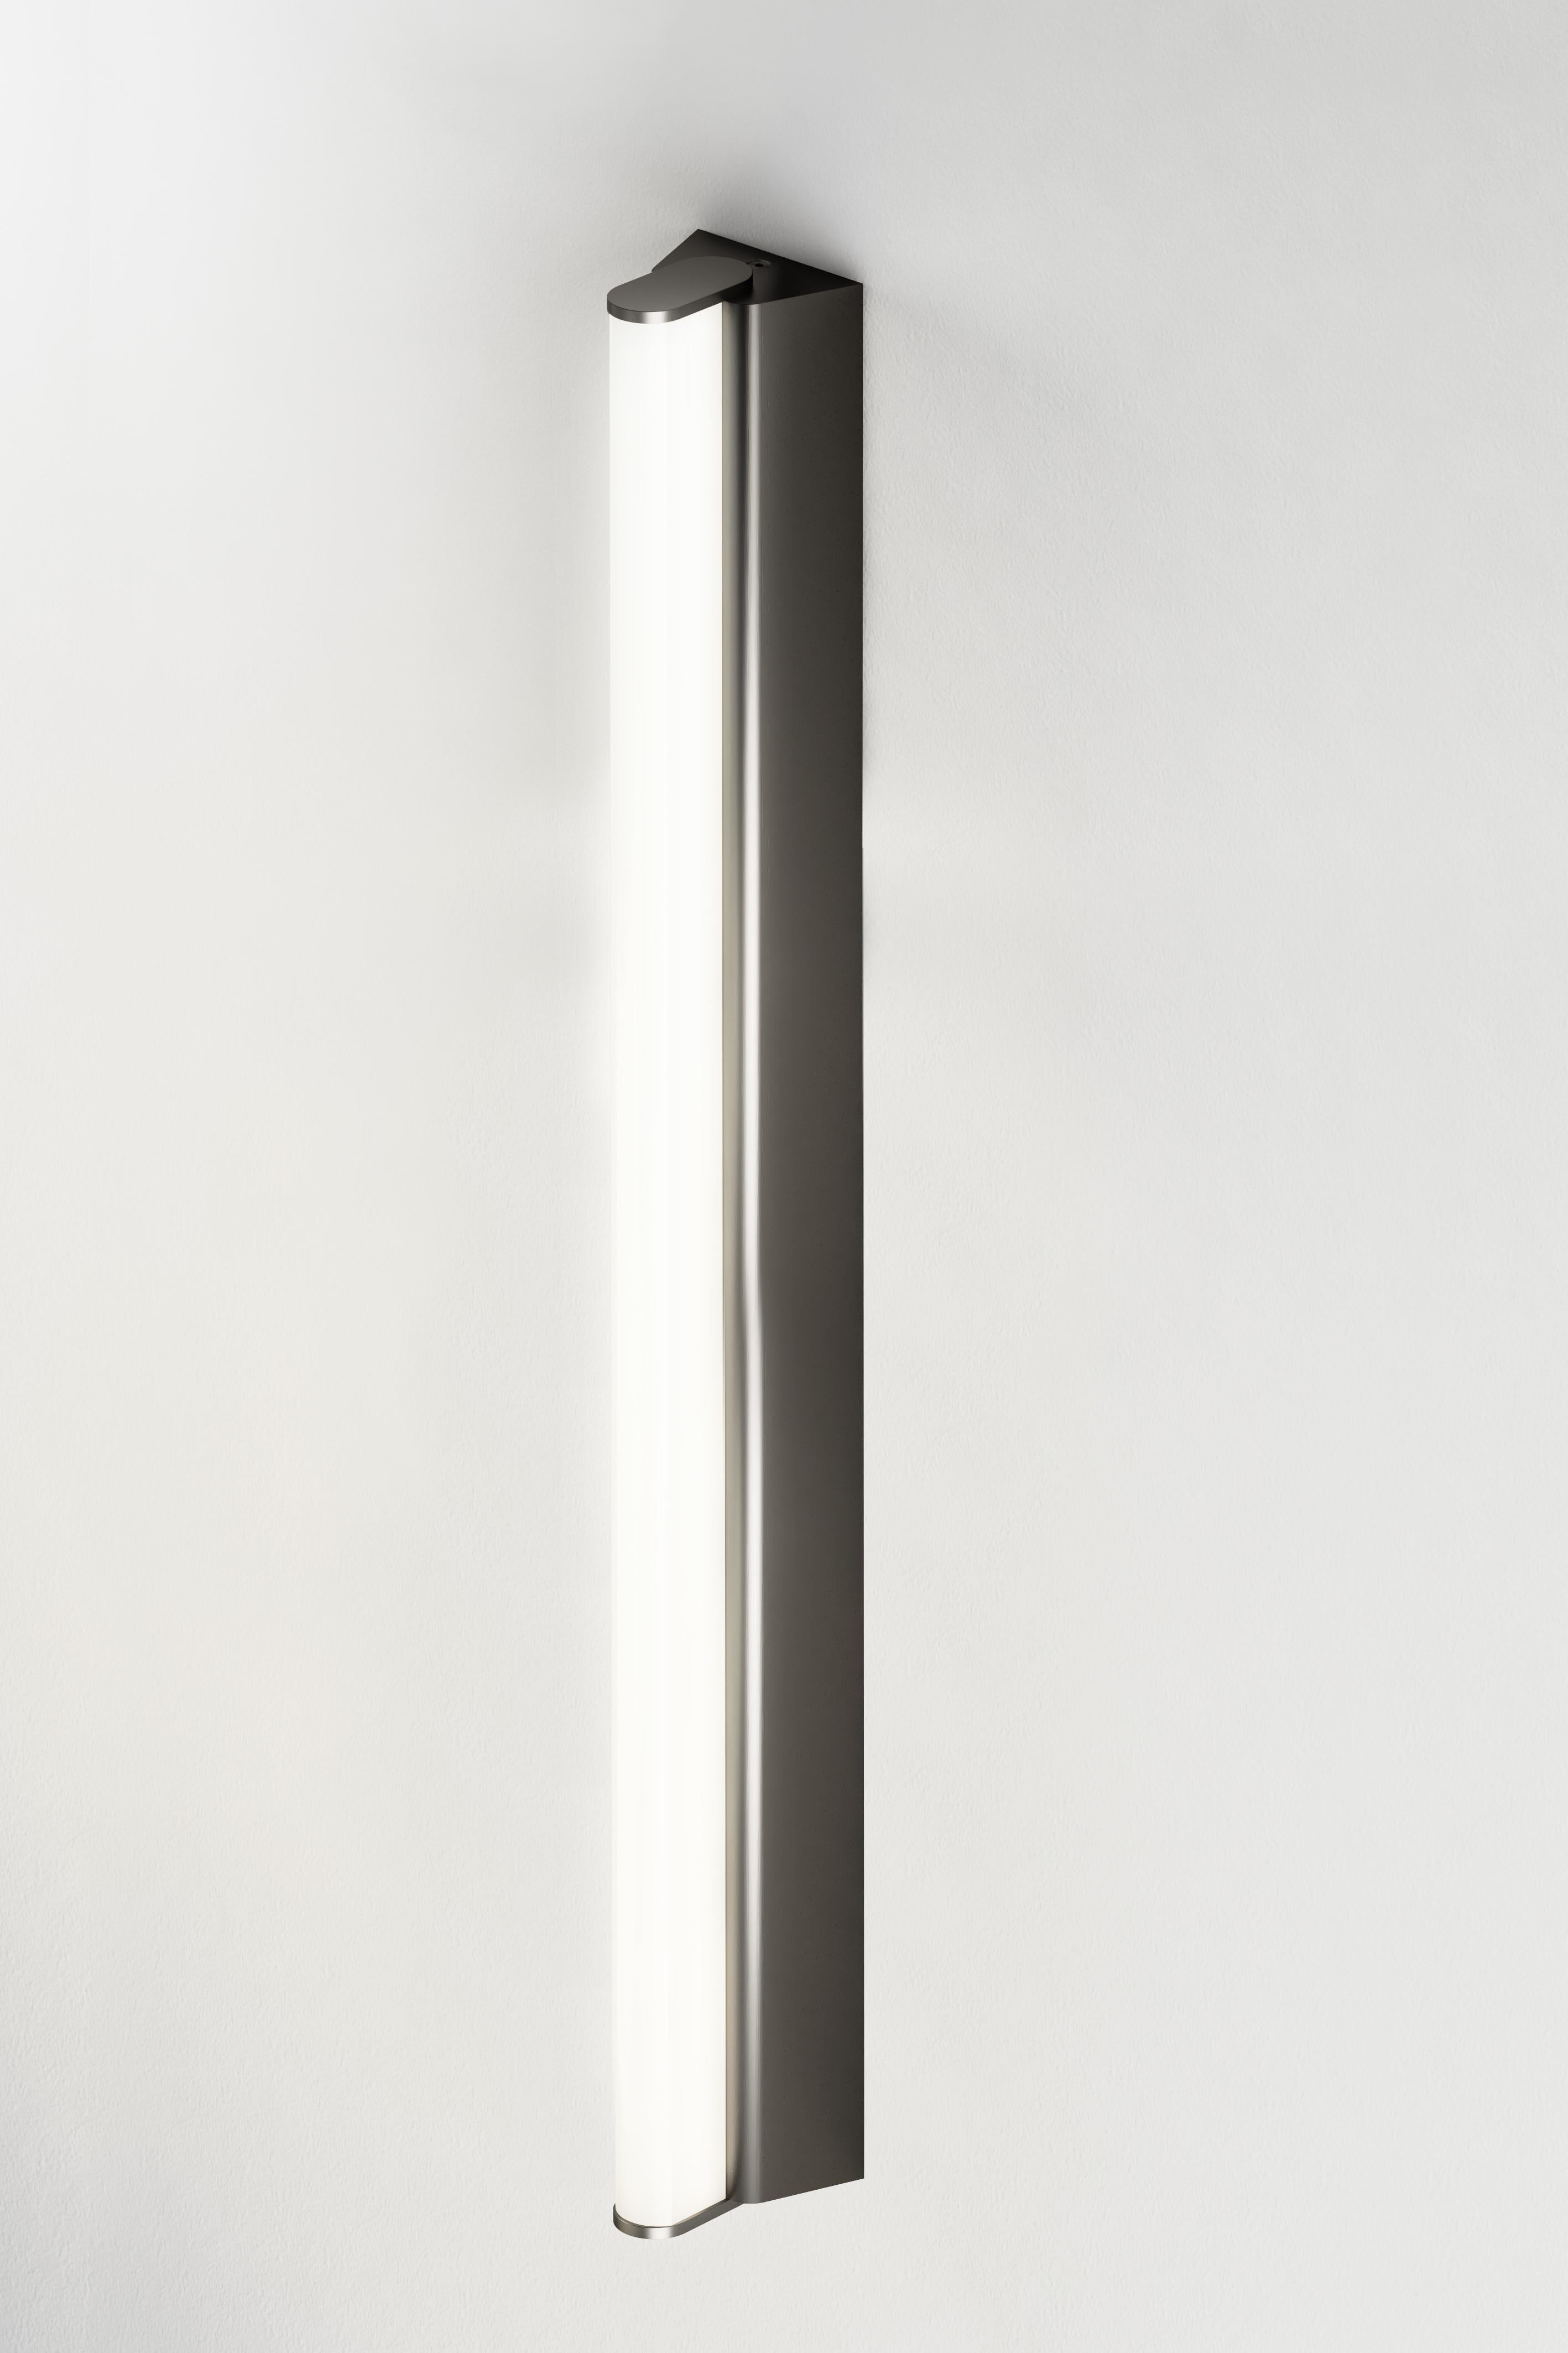 IP metrop 525 satin graphite wall light by Emilie Cathelineau
Dimensions: D52.5 x W5 X H4.5 cm
Materials: Solid brass, Satin Graphite, LED, Polycarbonate.
Others finishes and dimensions are available.

All our lamps can be wired according to